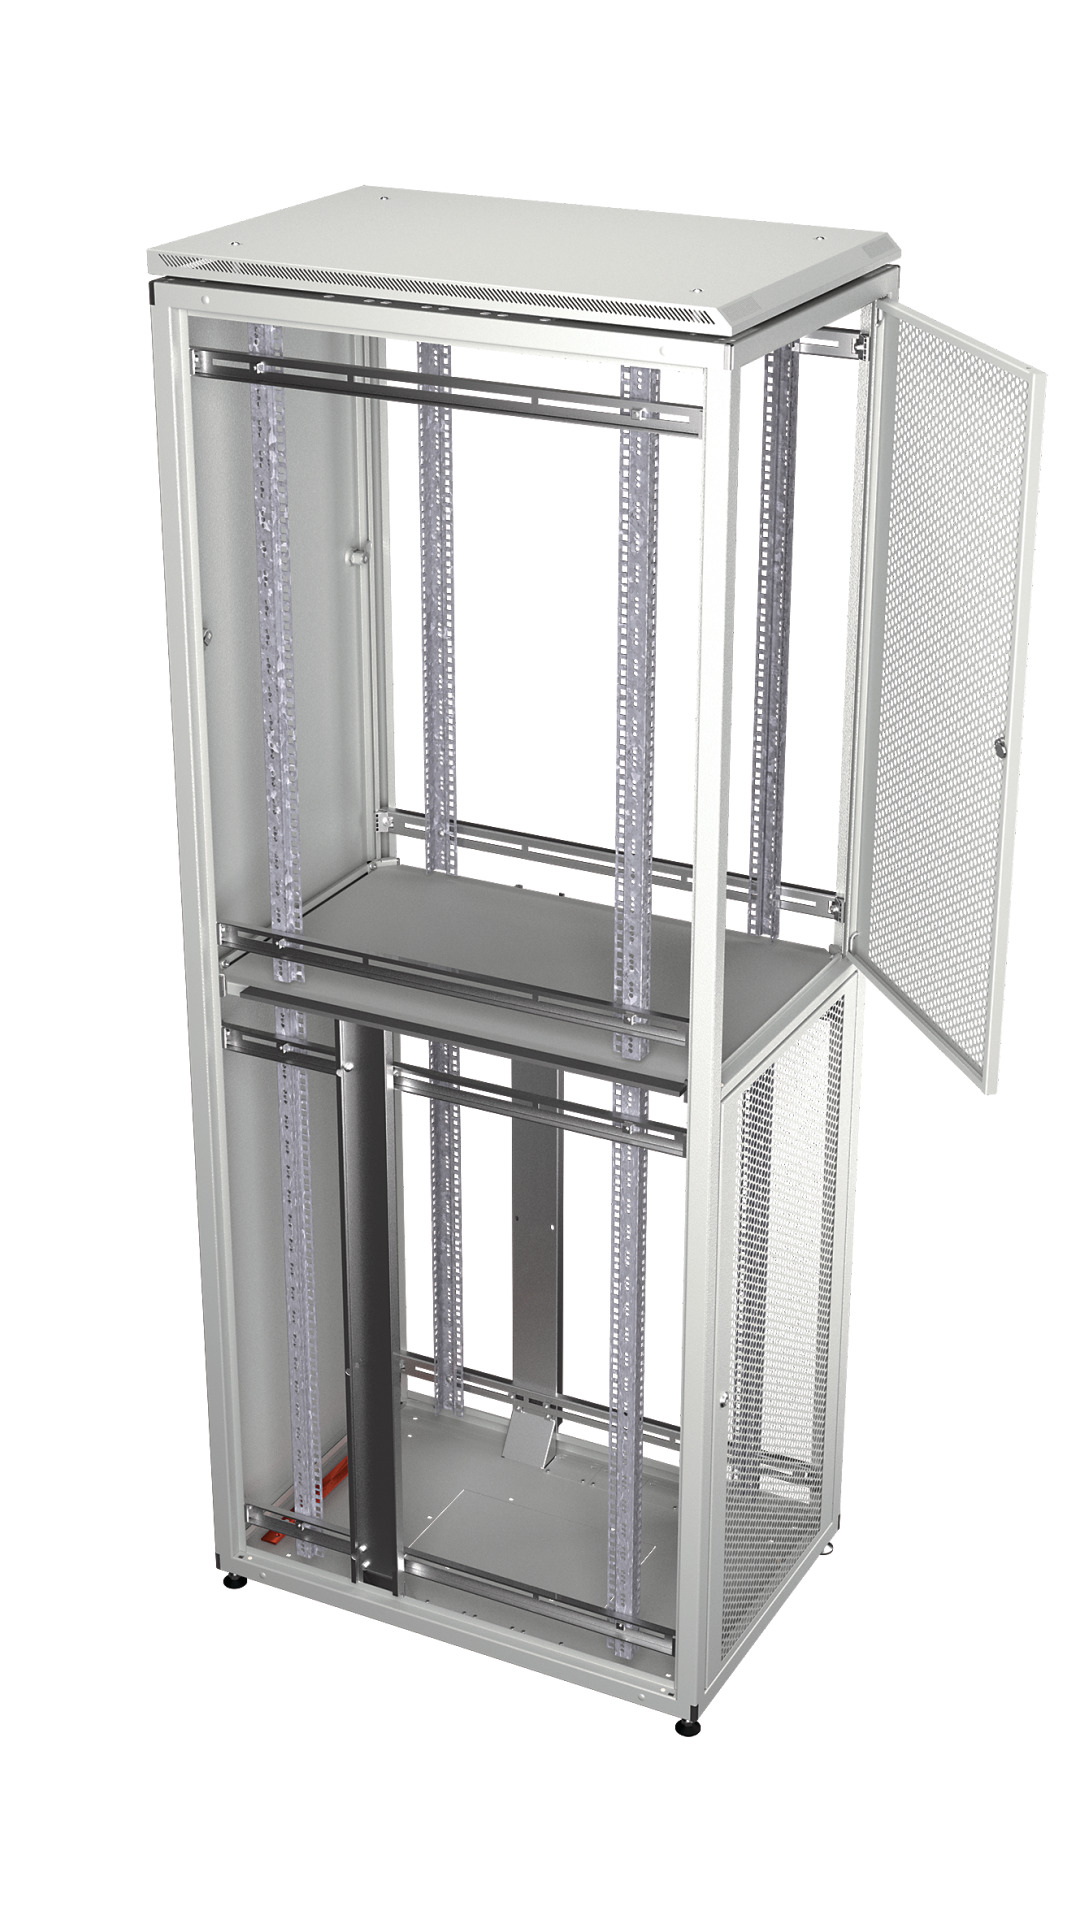 Co-Location Rack PRO, 2 x 23HE, 600x1000 mm, F+R 1-tlg. perforiert, RAL7035